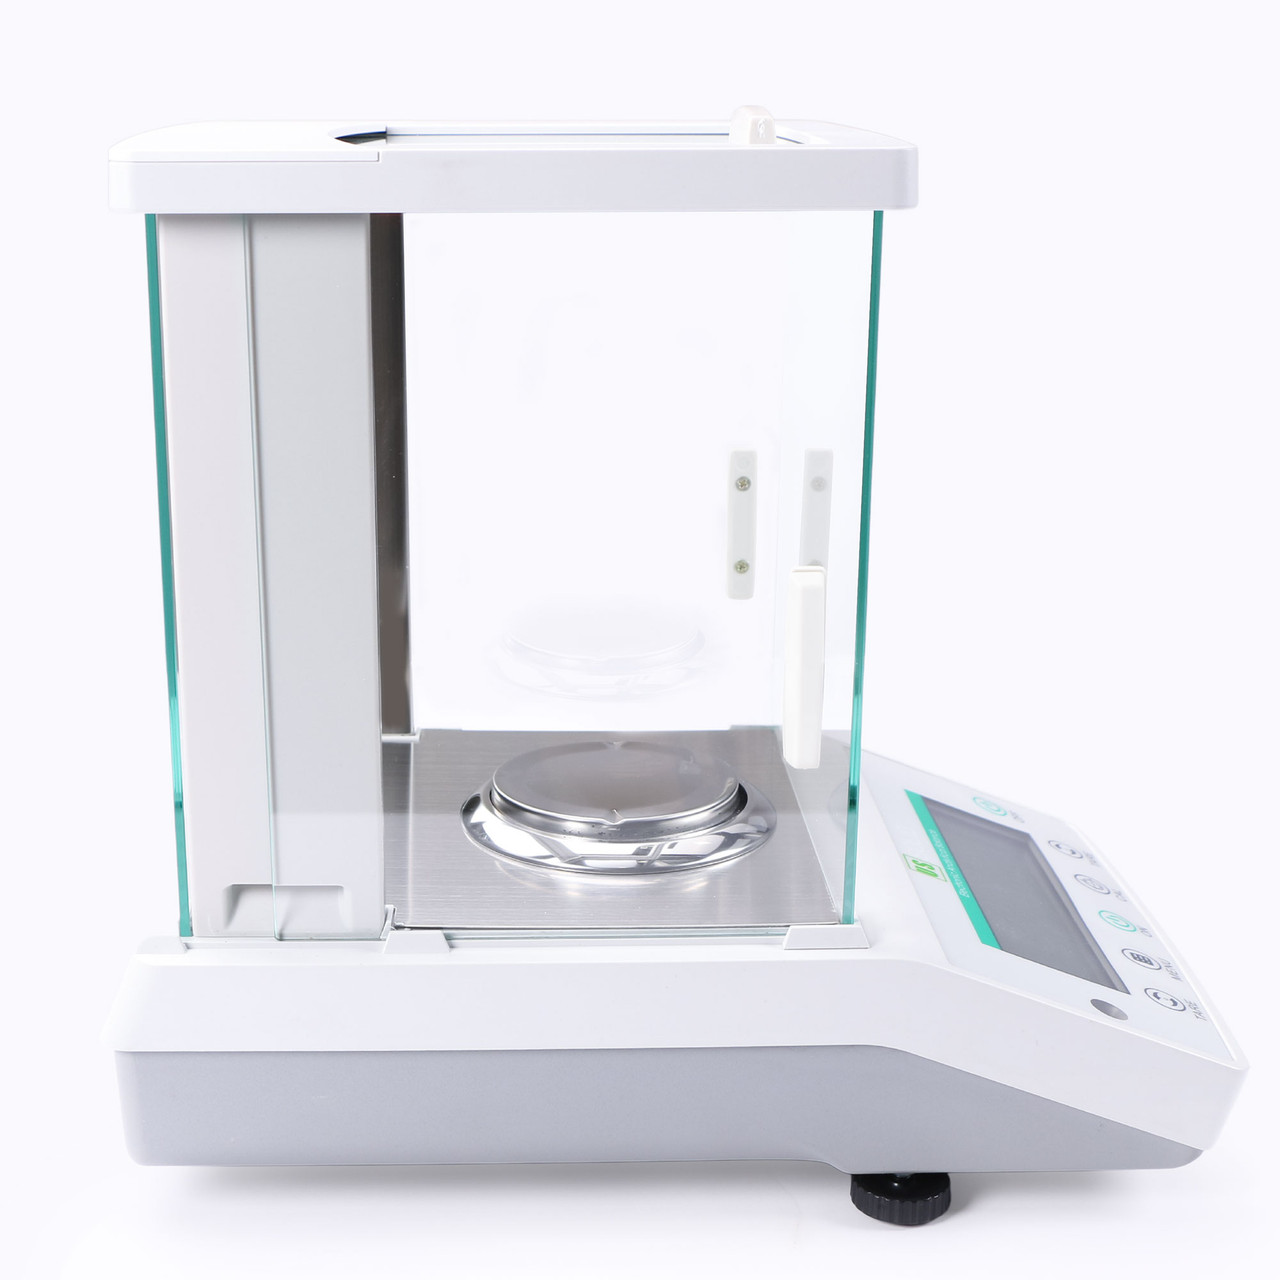 U.S. Solid 220g/0.1mg Analytical Balance Digital Precision Lab Scale 0.0001g for Powder Types and Liquid RS232 Interface, Size: 80